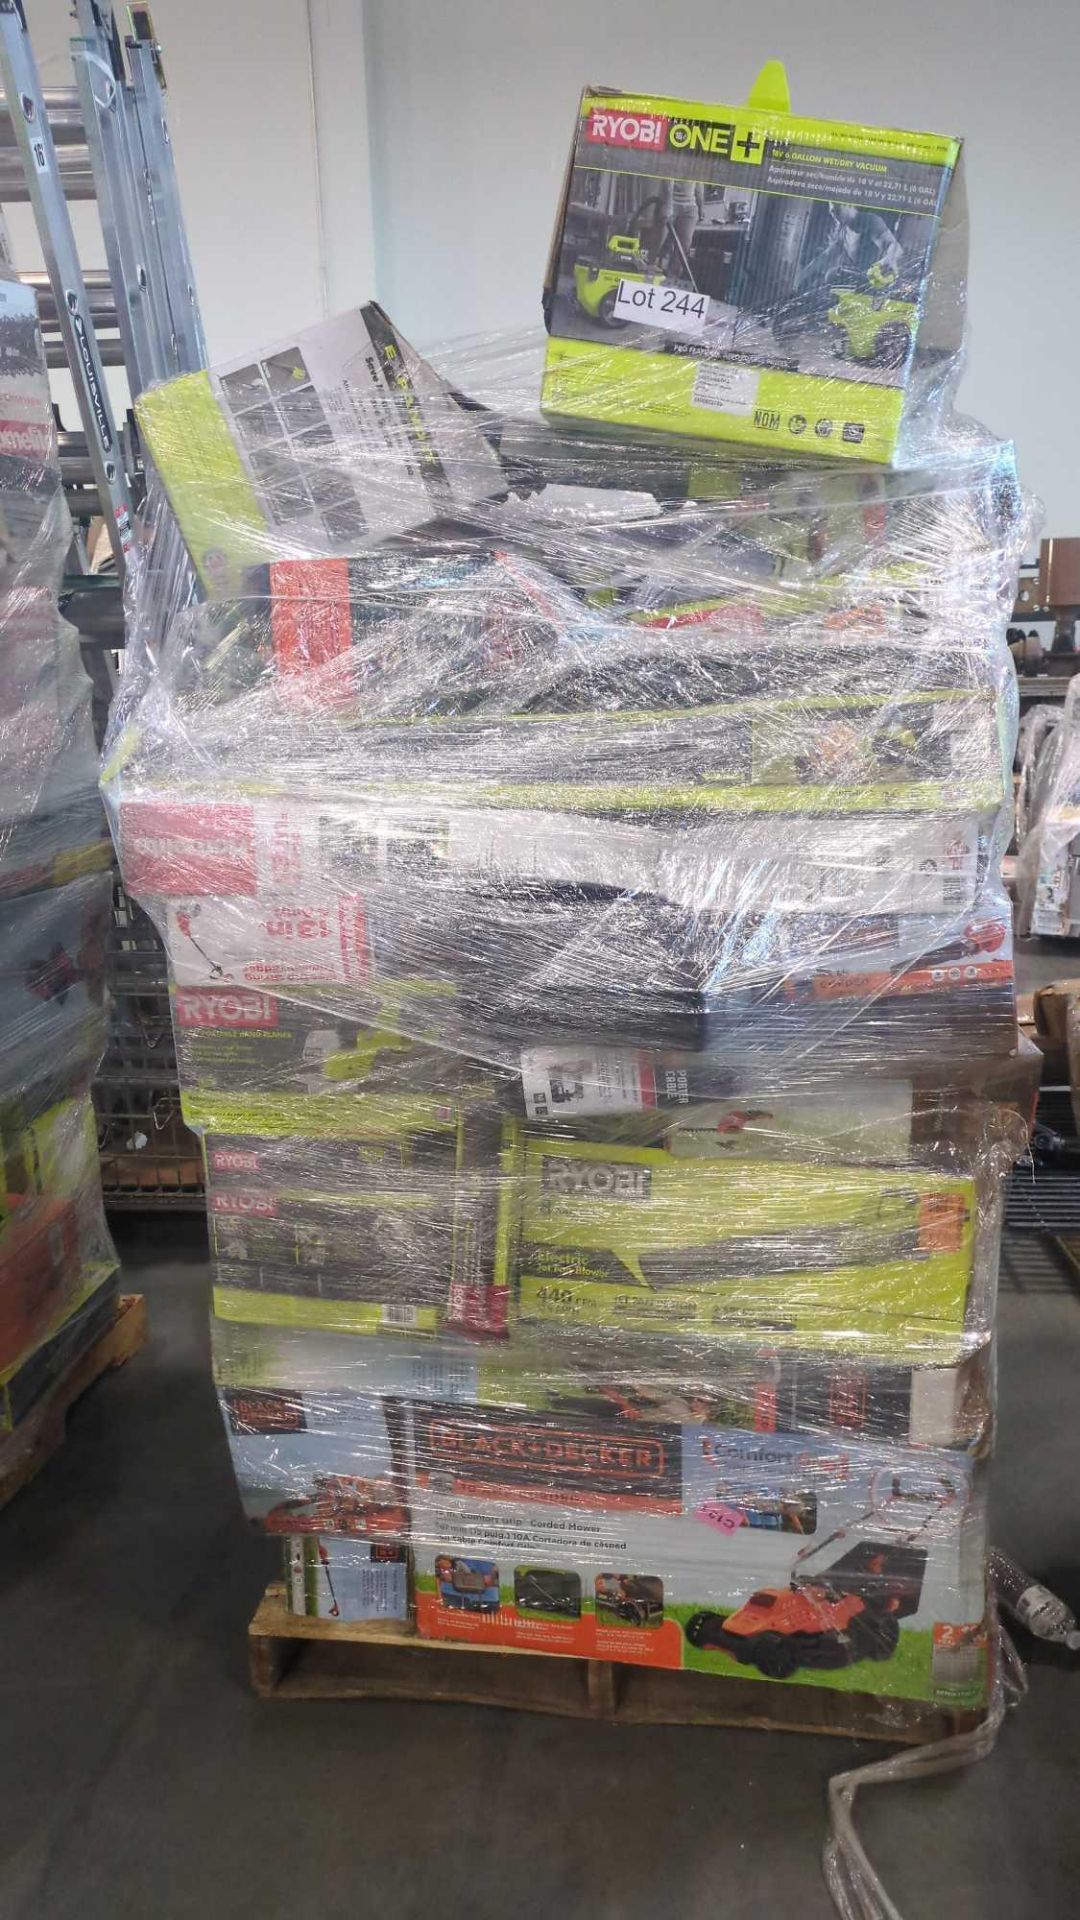 Ryobi One trimmers Black& Decker edgers homelite and more some new some customer returns - Image 2 of 4